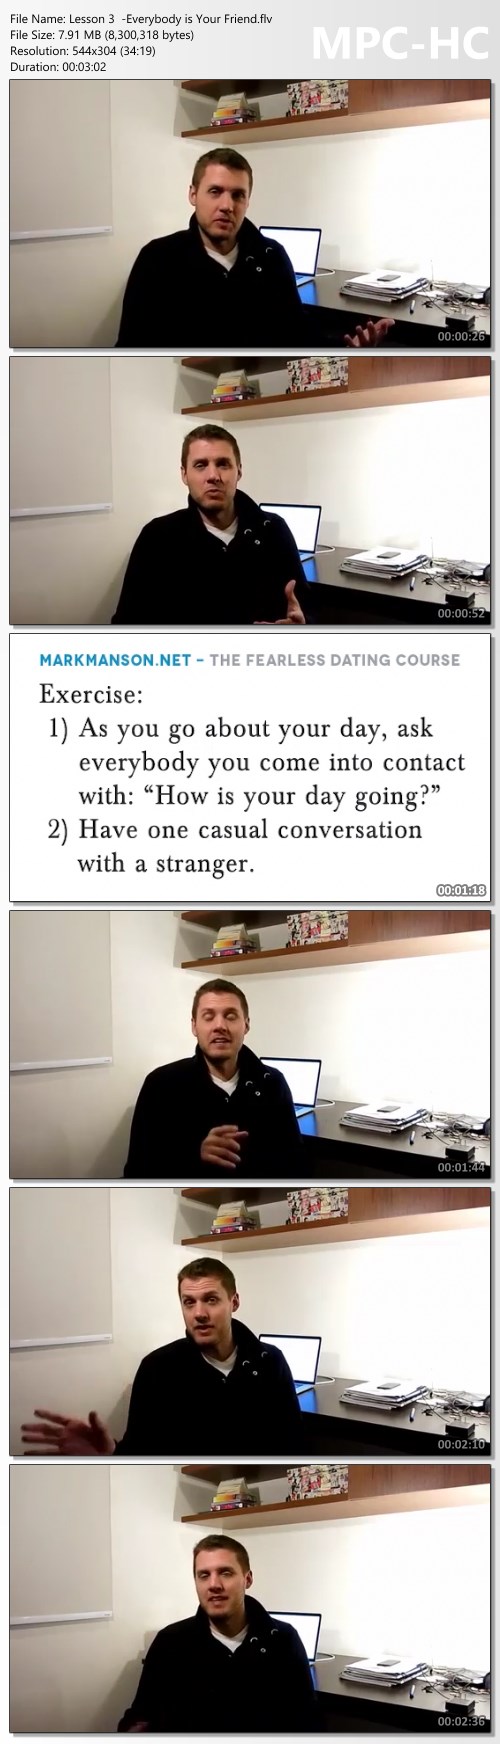 The Fearless Dating Course - Mark Manson